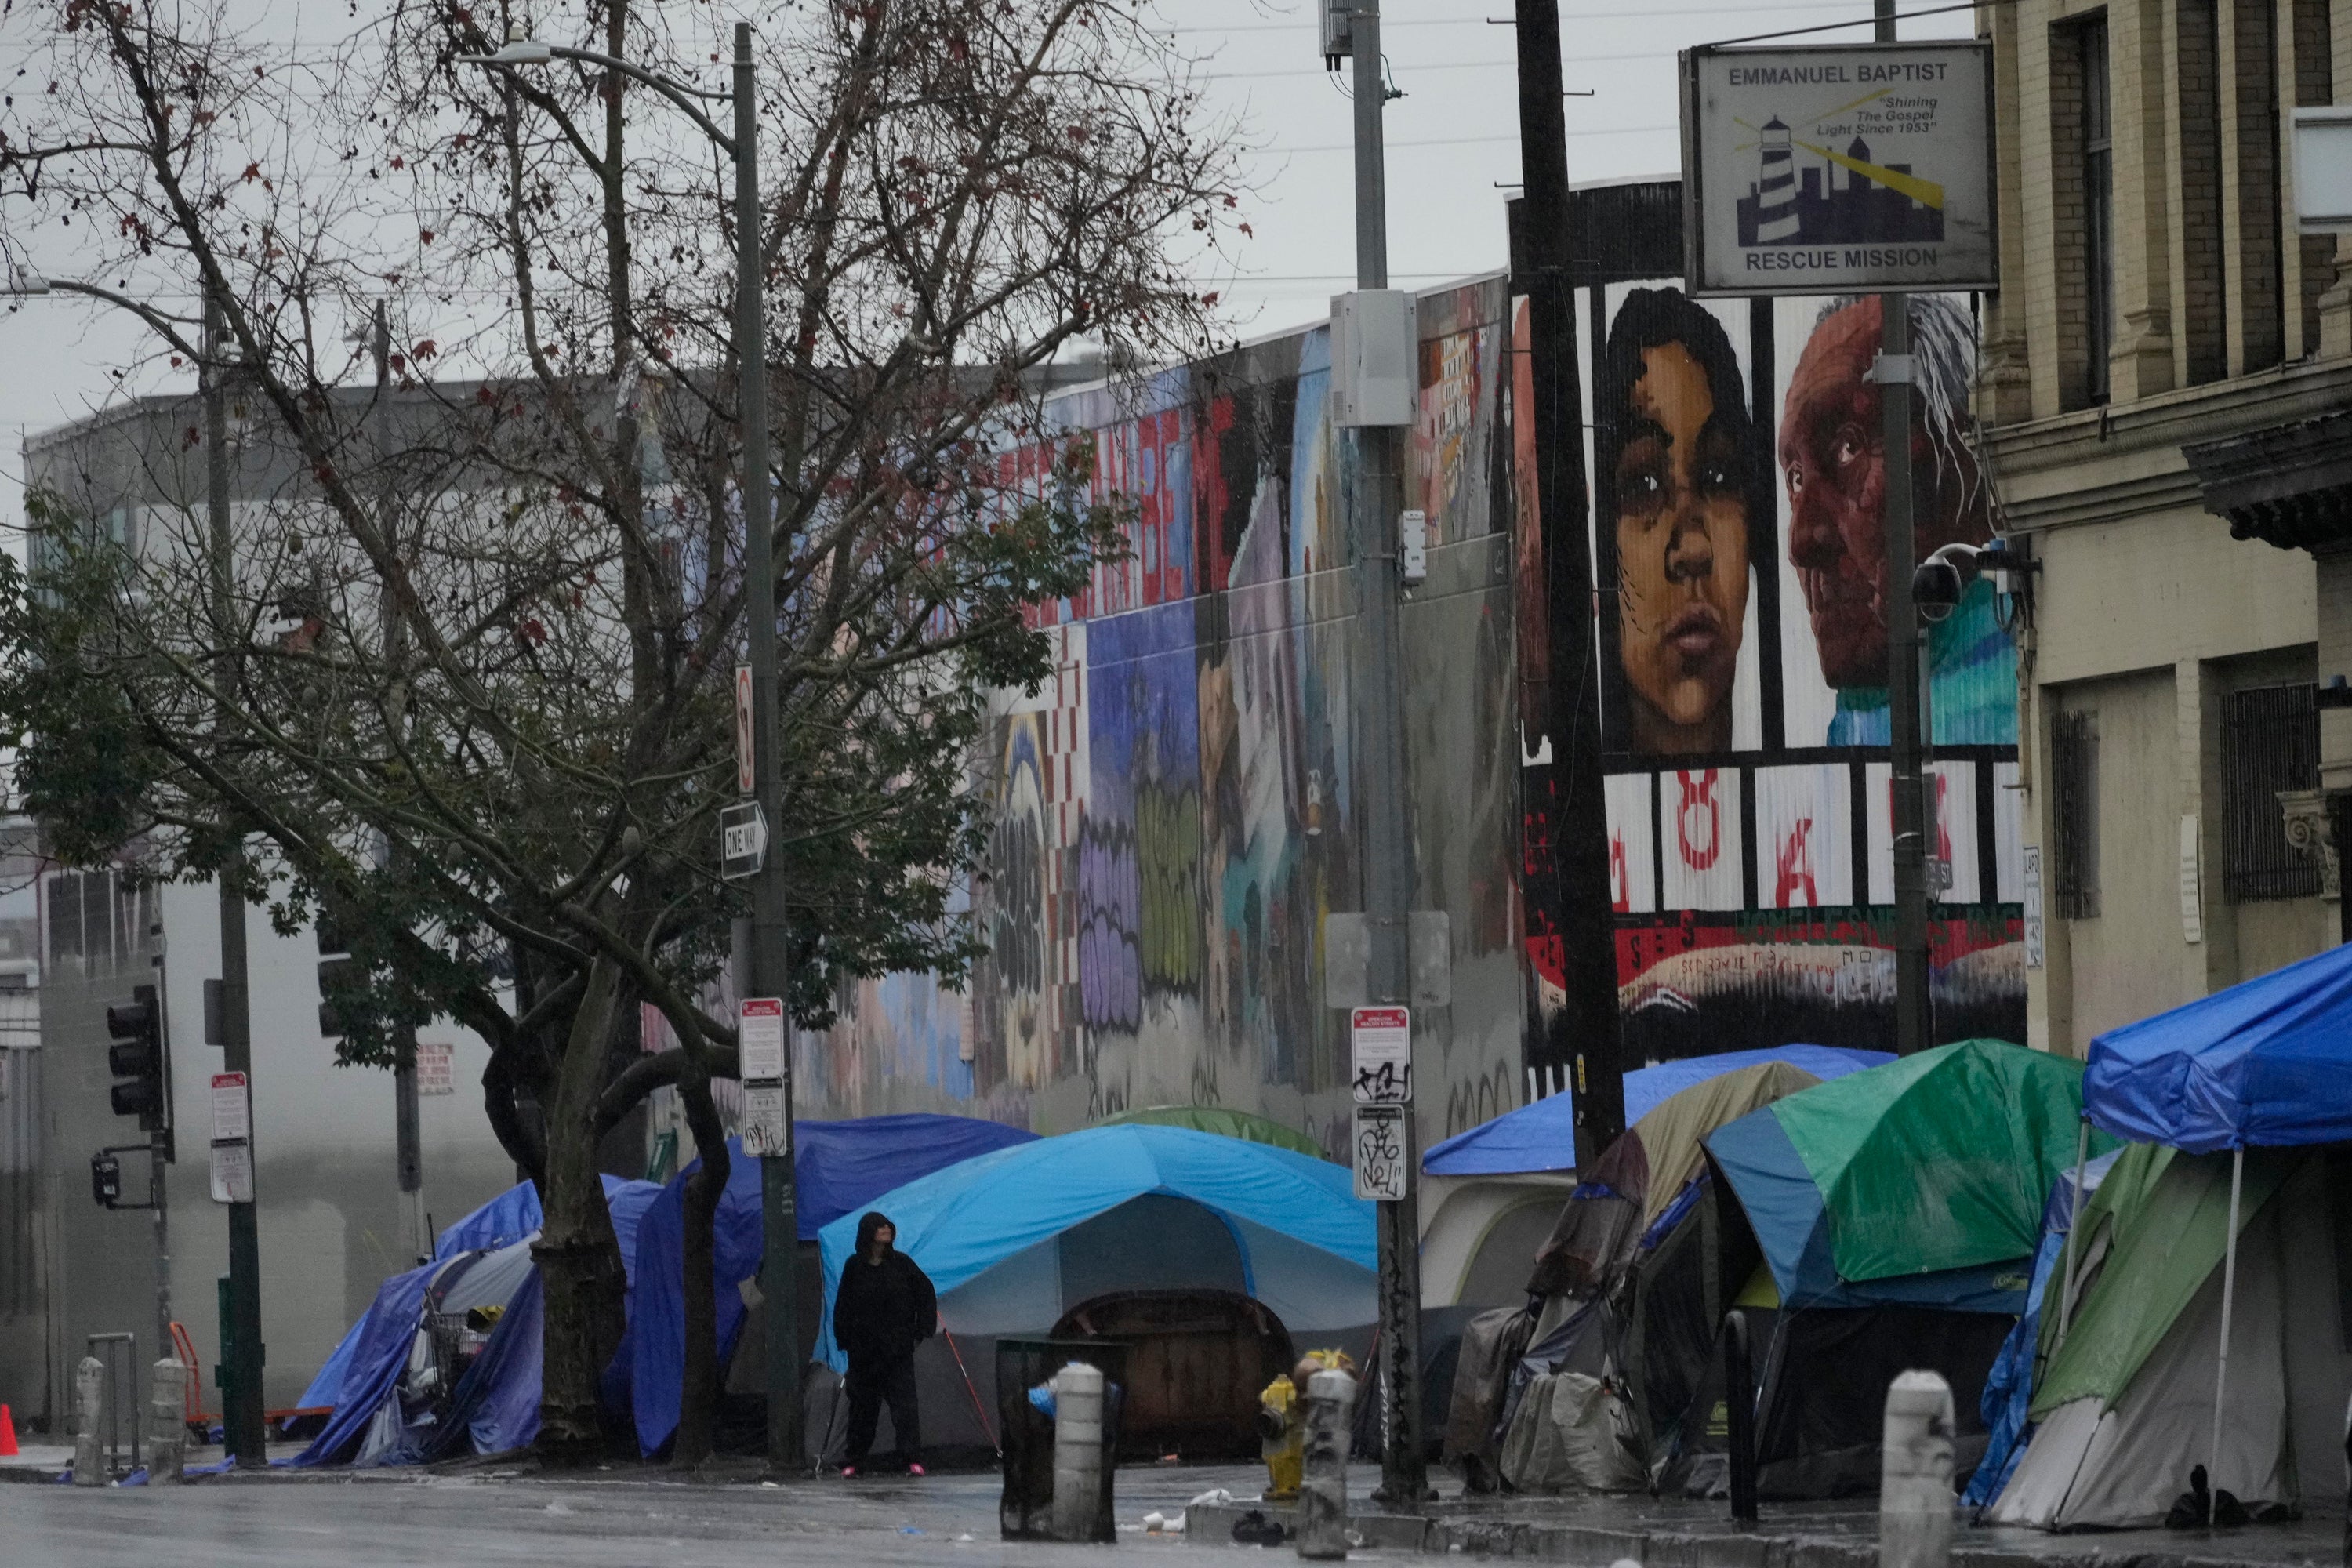 Community organisers say the City of LA’s response to its homeless community during the storms has been ‘abysmal’